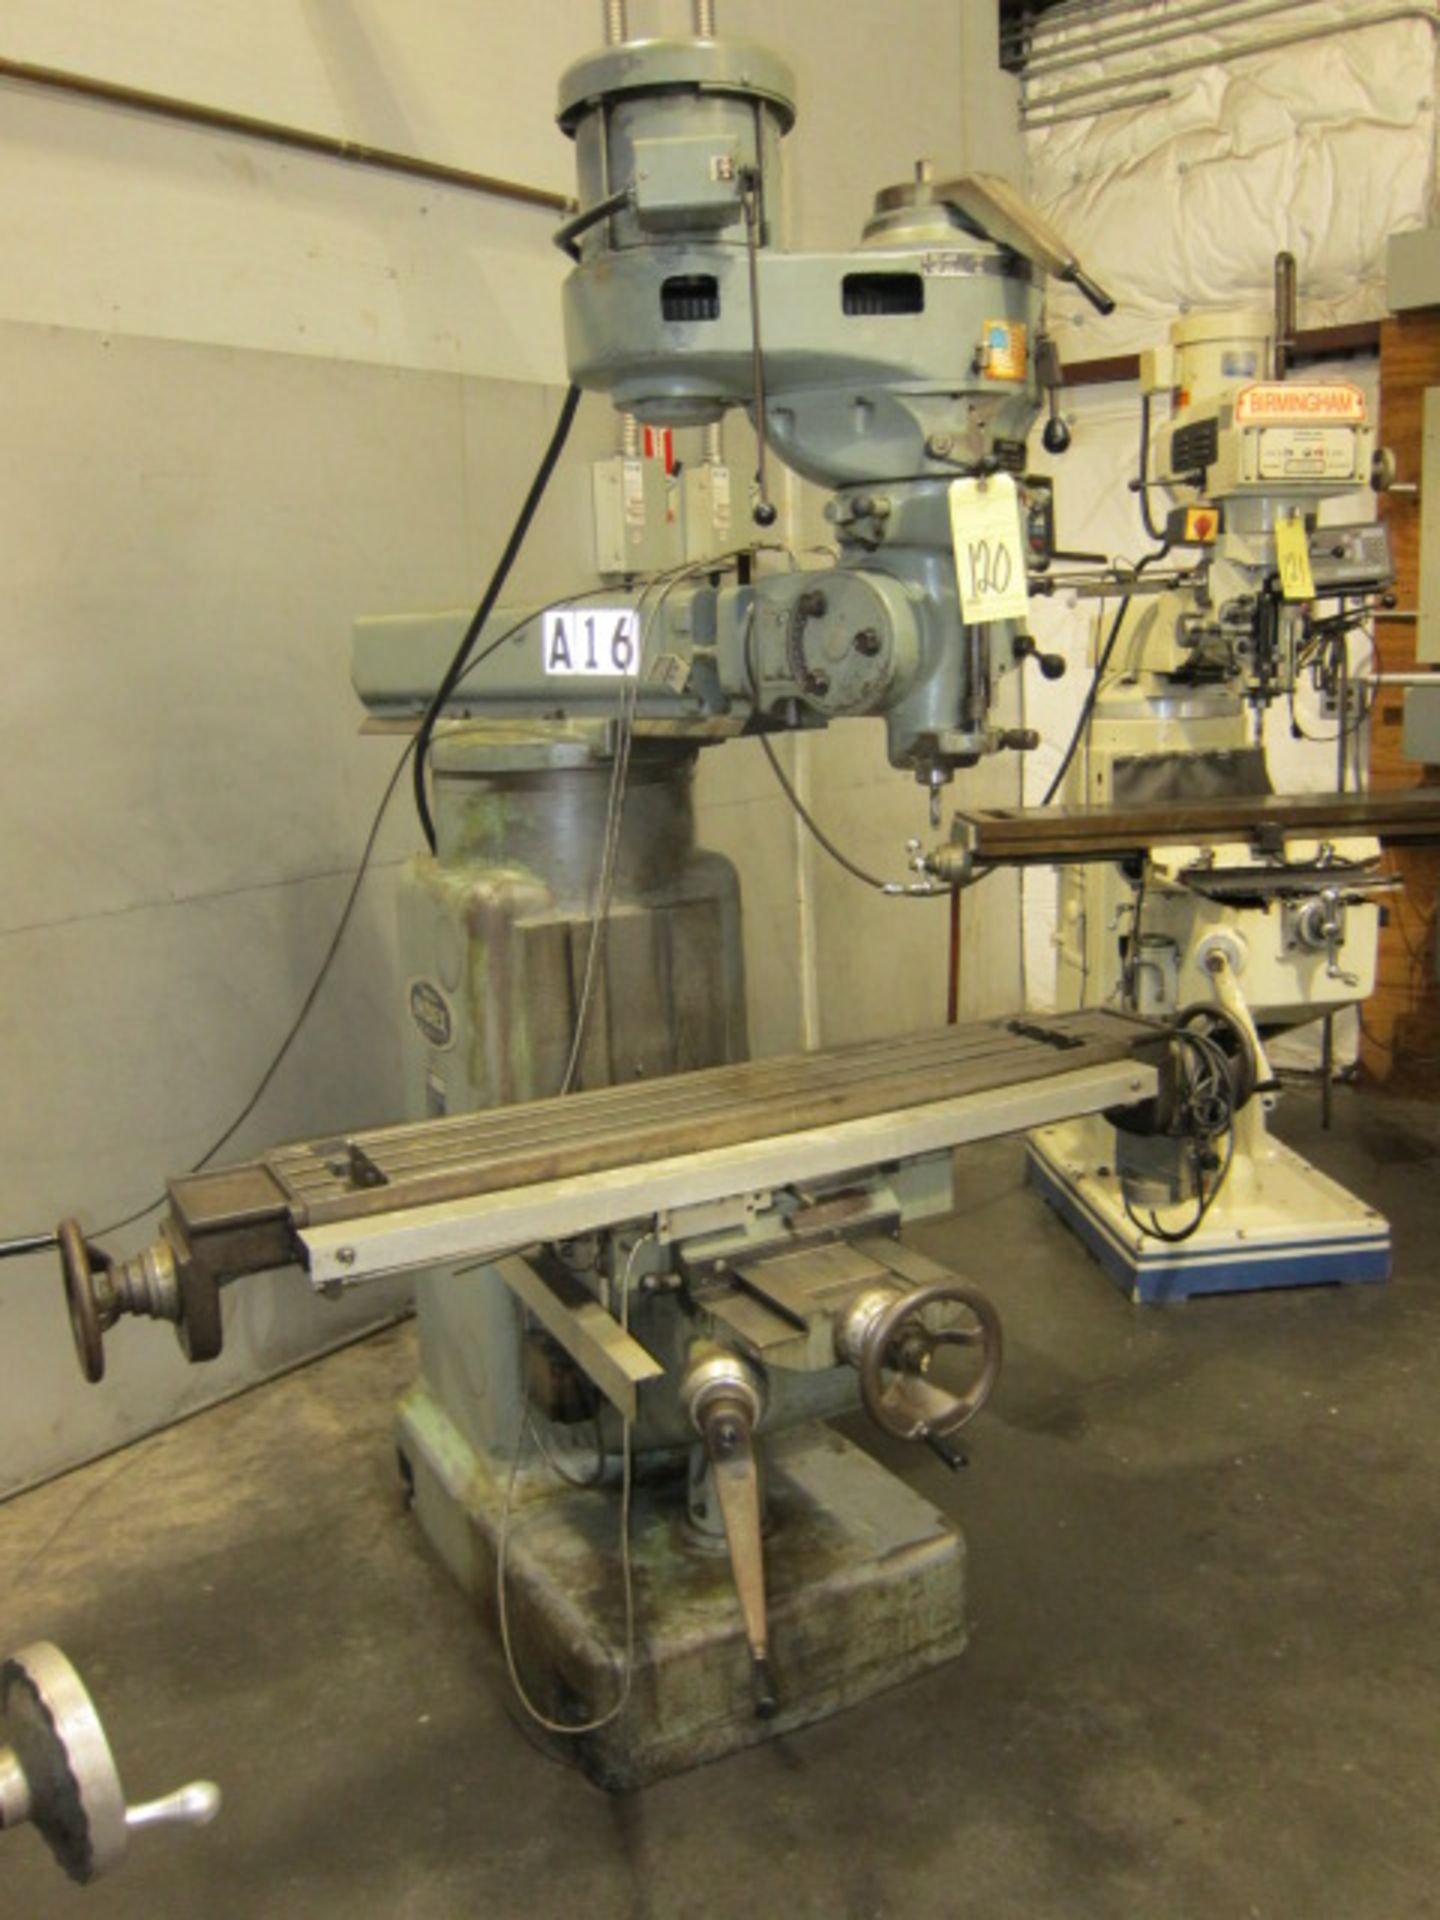 VERTICAL TURRET MILL, WELLS INDEX MDL. 847, 9" x 48" table w/pwr. feed, spds: 50-4200 RPM, 2-axis - Image 3 of 4